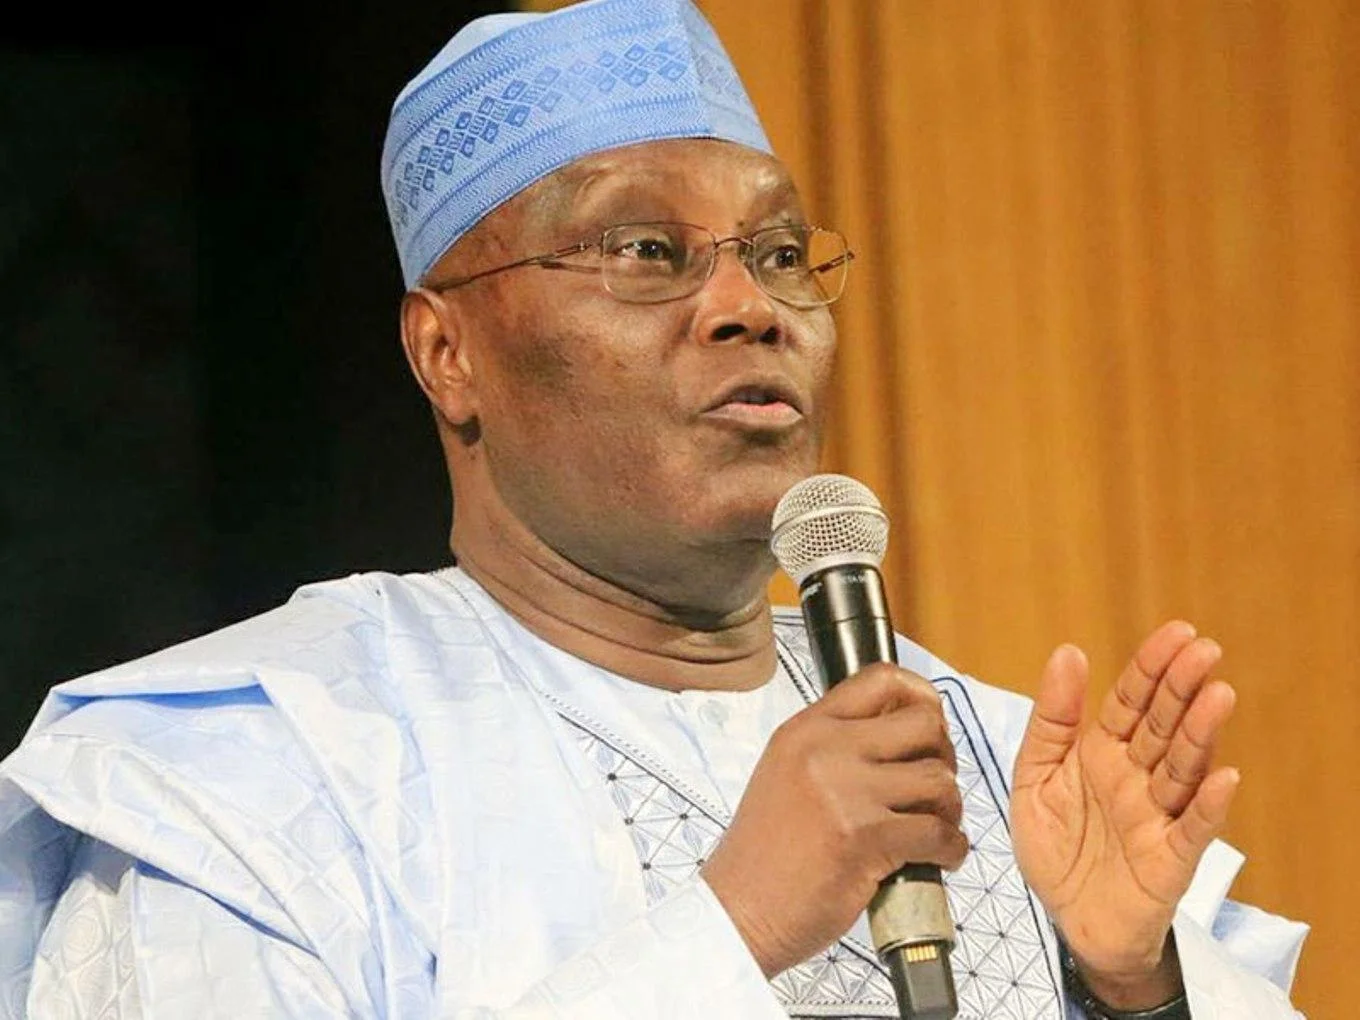 Elections2023: 'I Will Wage War Against Hunger If Elected Into Power'- Atiku